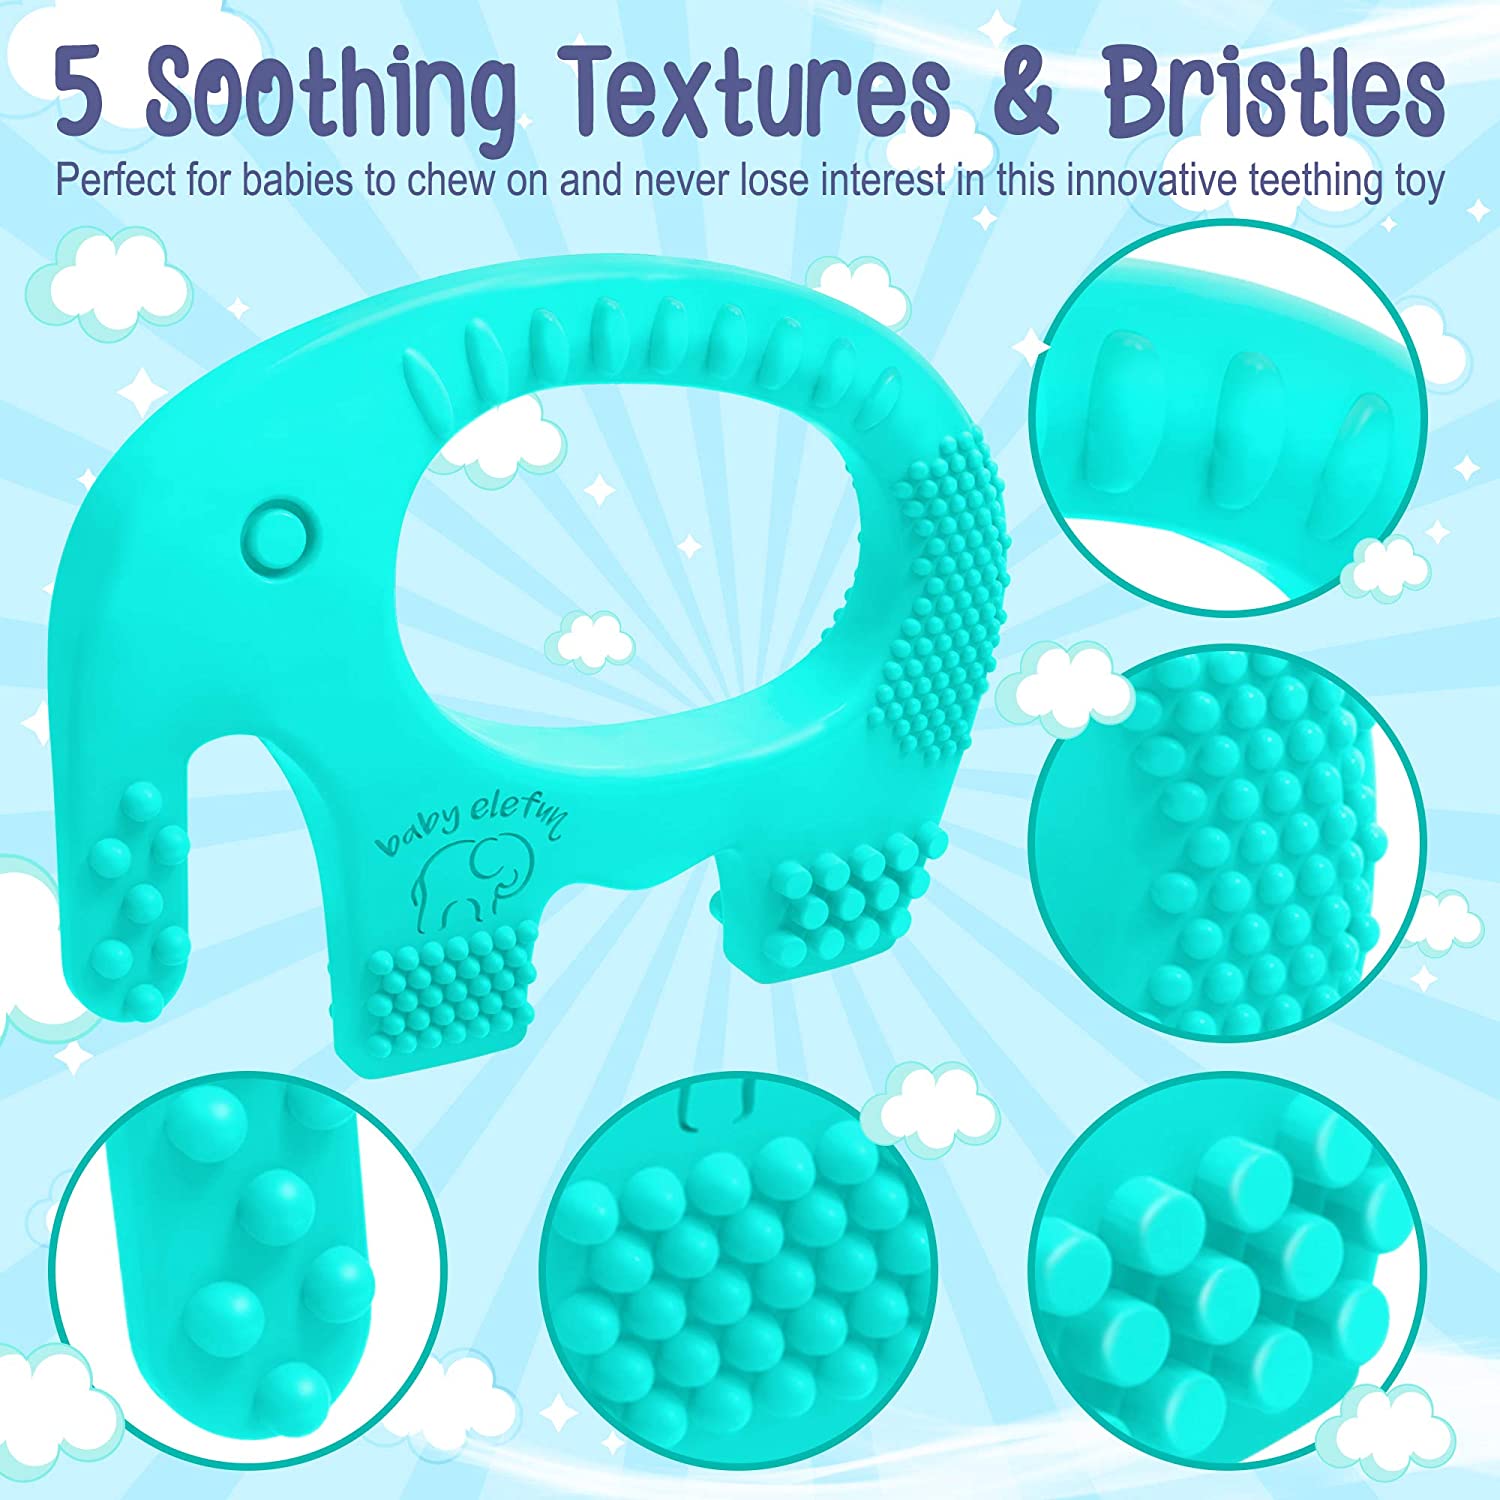 Baby Elefun Teething Toys, BPA Free Silicone Teethers - Easy to Hold - with Gift Christmas Stocking Stuffers Package, Highly Effective Elephant Teether Ring Toy for Babies 0-6 6-12 Months Boy or Girl